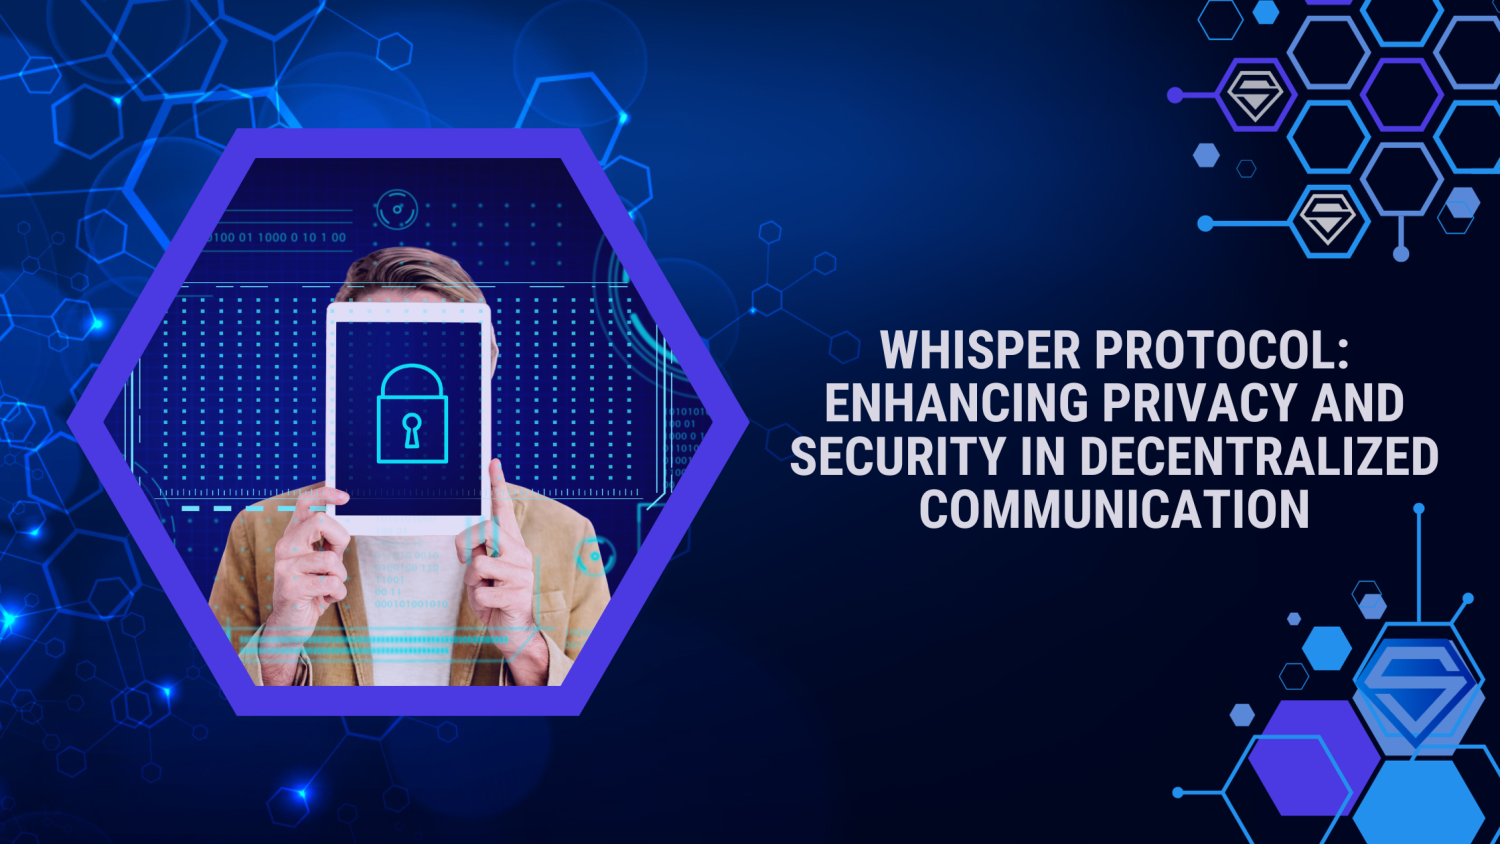 Whisper Protocol: Enhancing Privacy and Security in Decentralized Communication